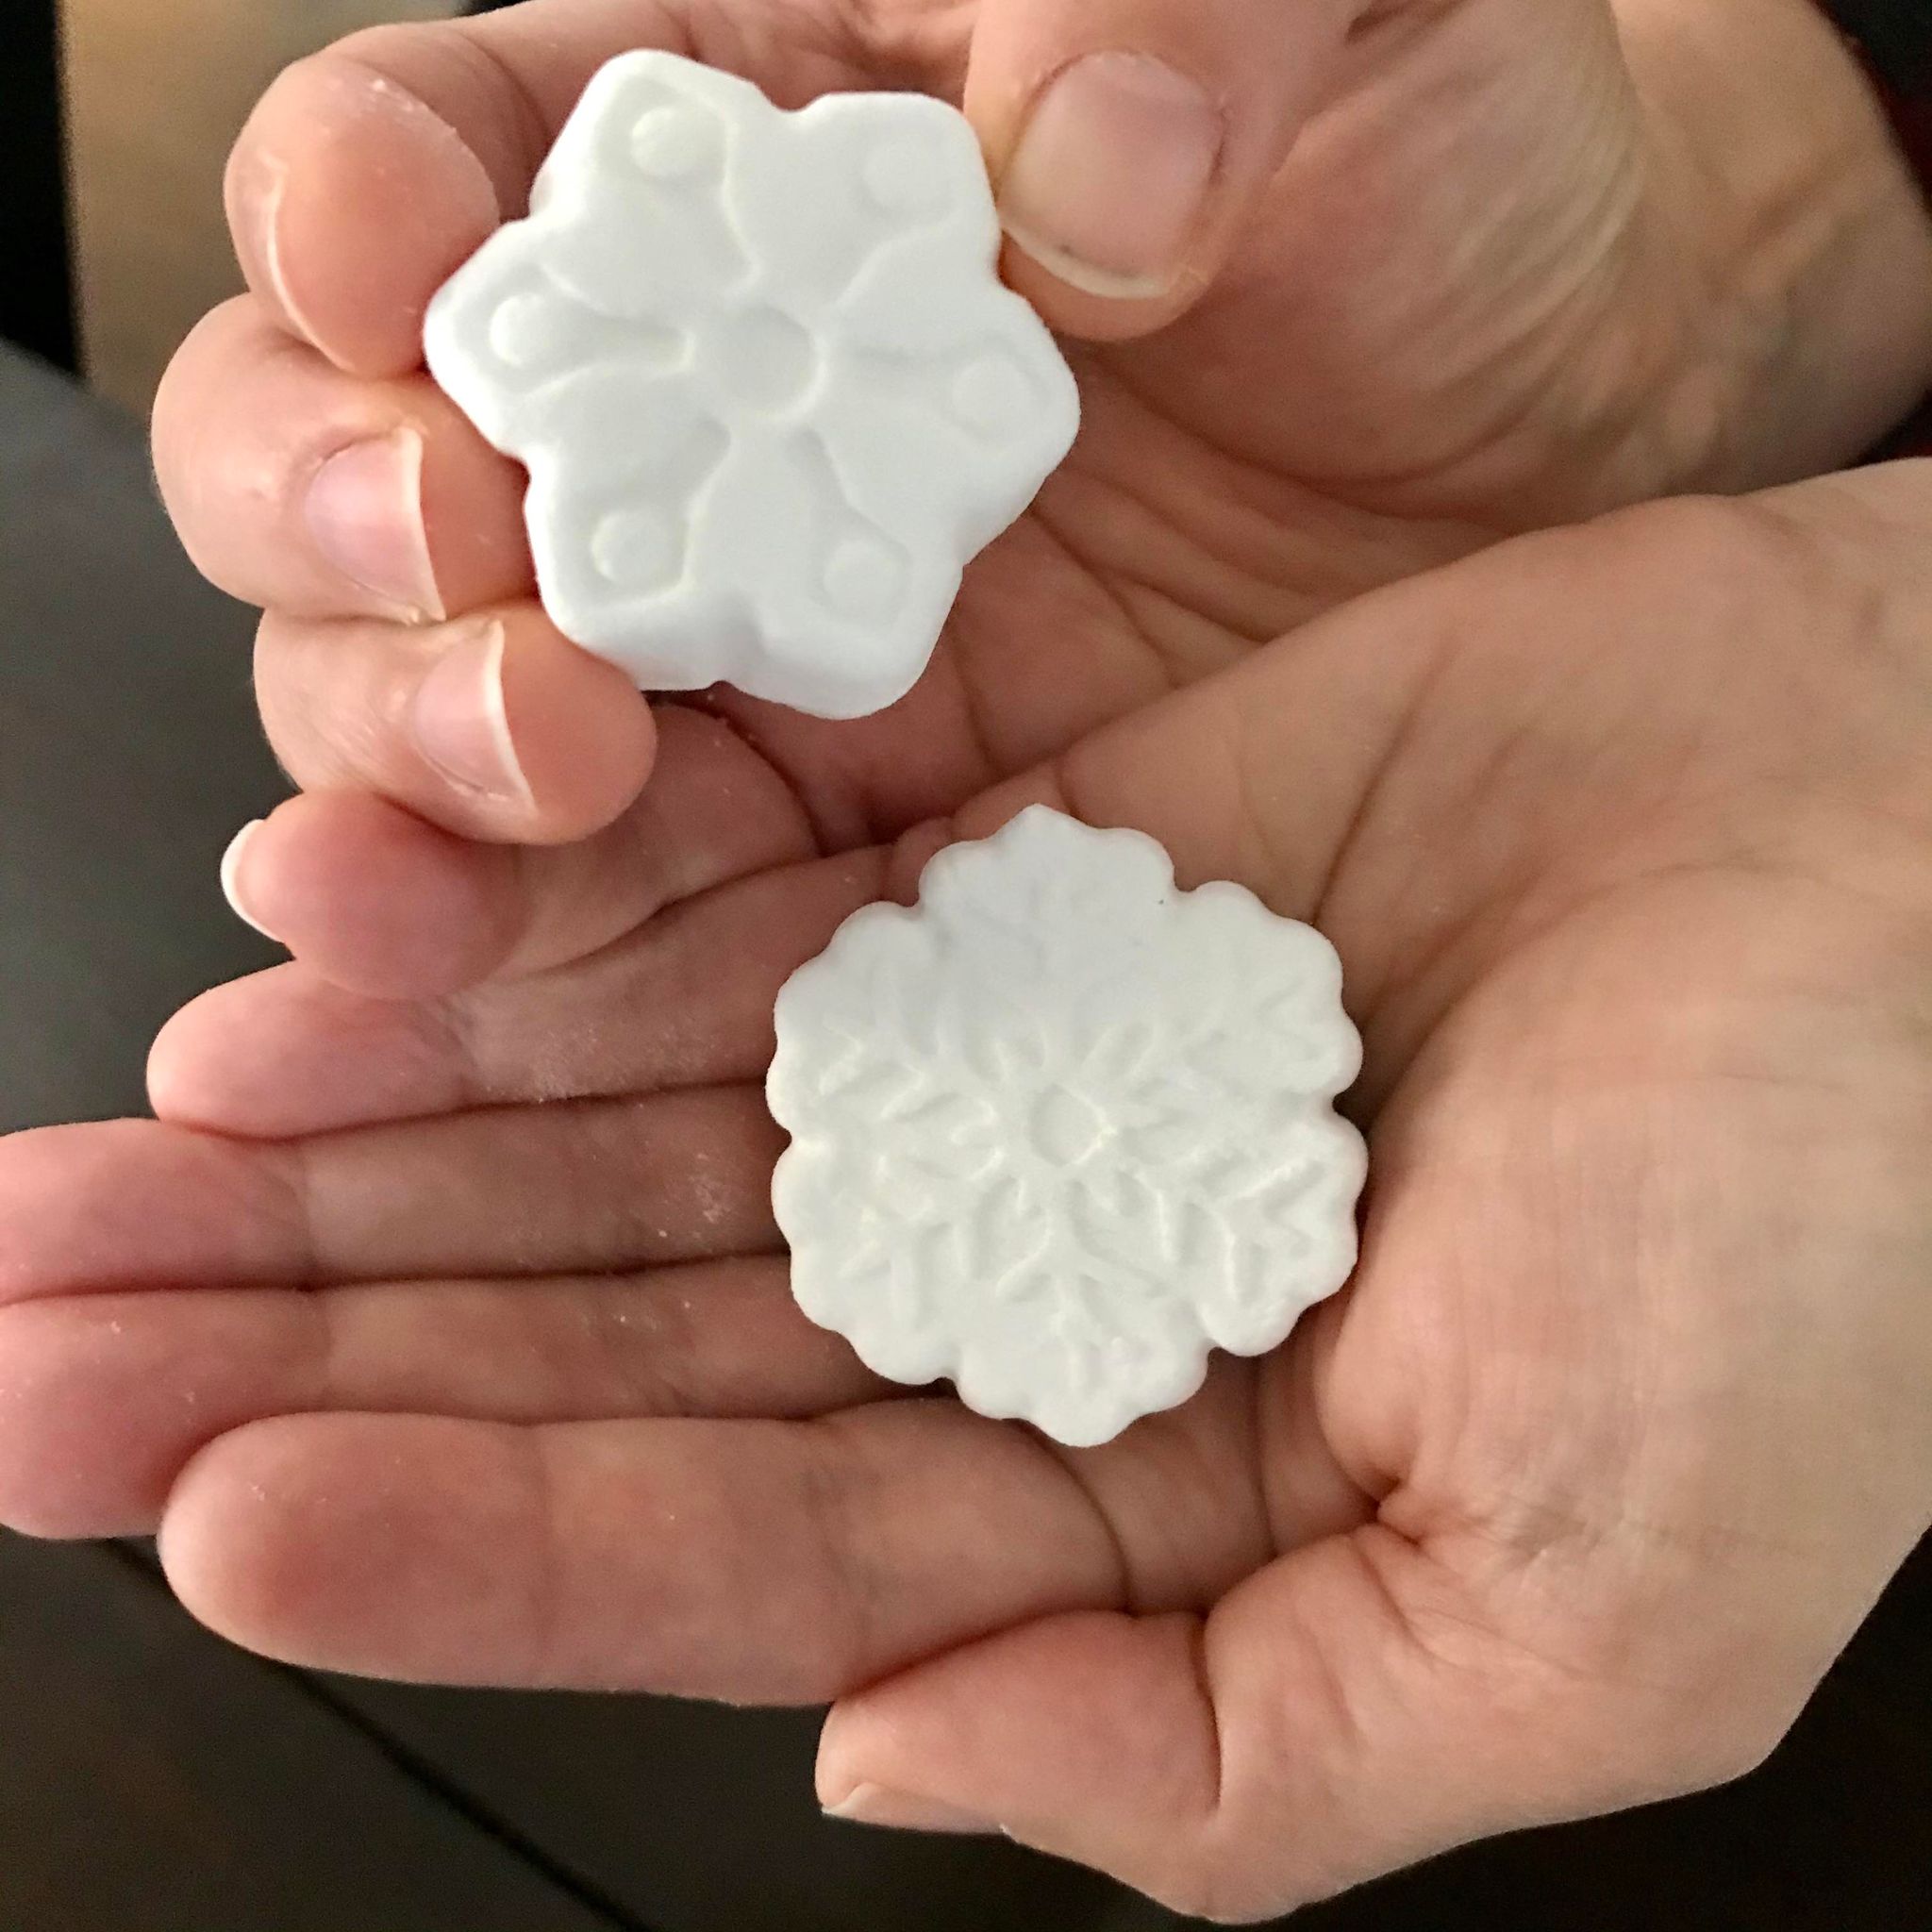 canadian made eucalyptus spearmint snowflake shower melts made in Canada by Simply Natural Canada in regular snowflake and petite snowflake sets of 3